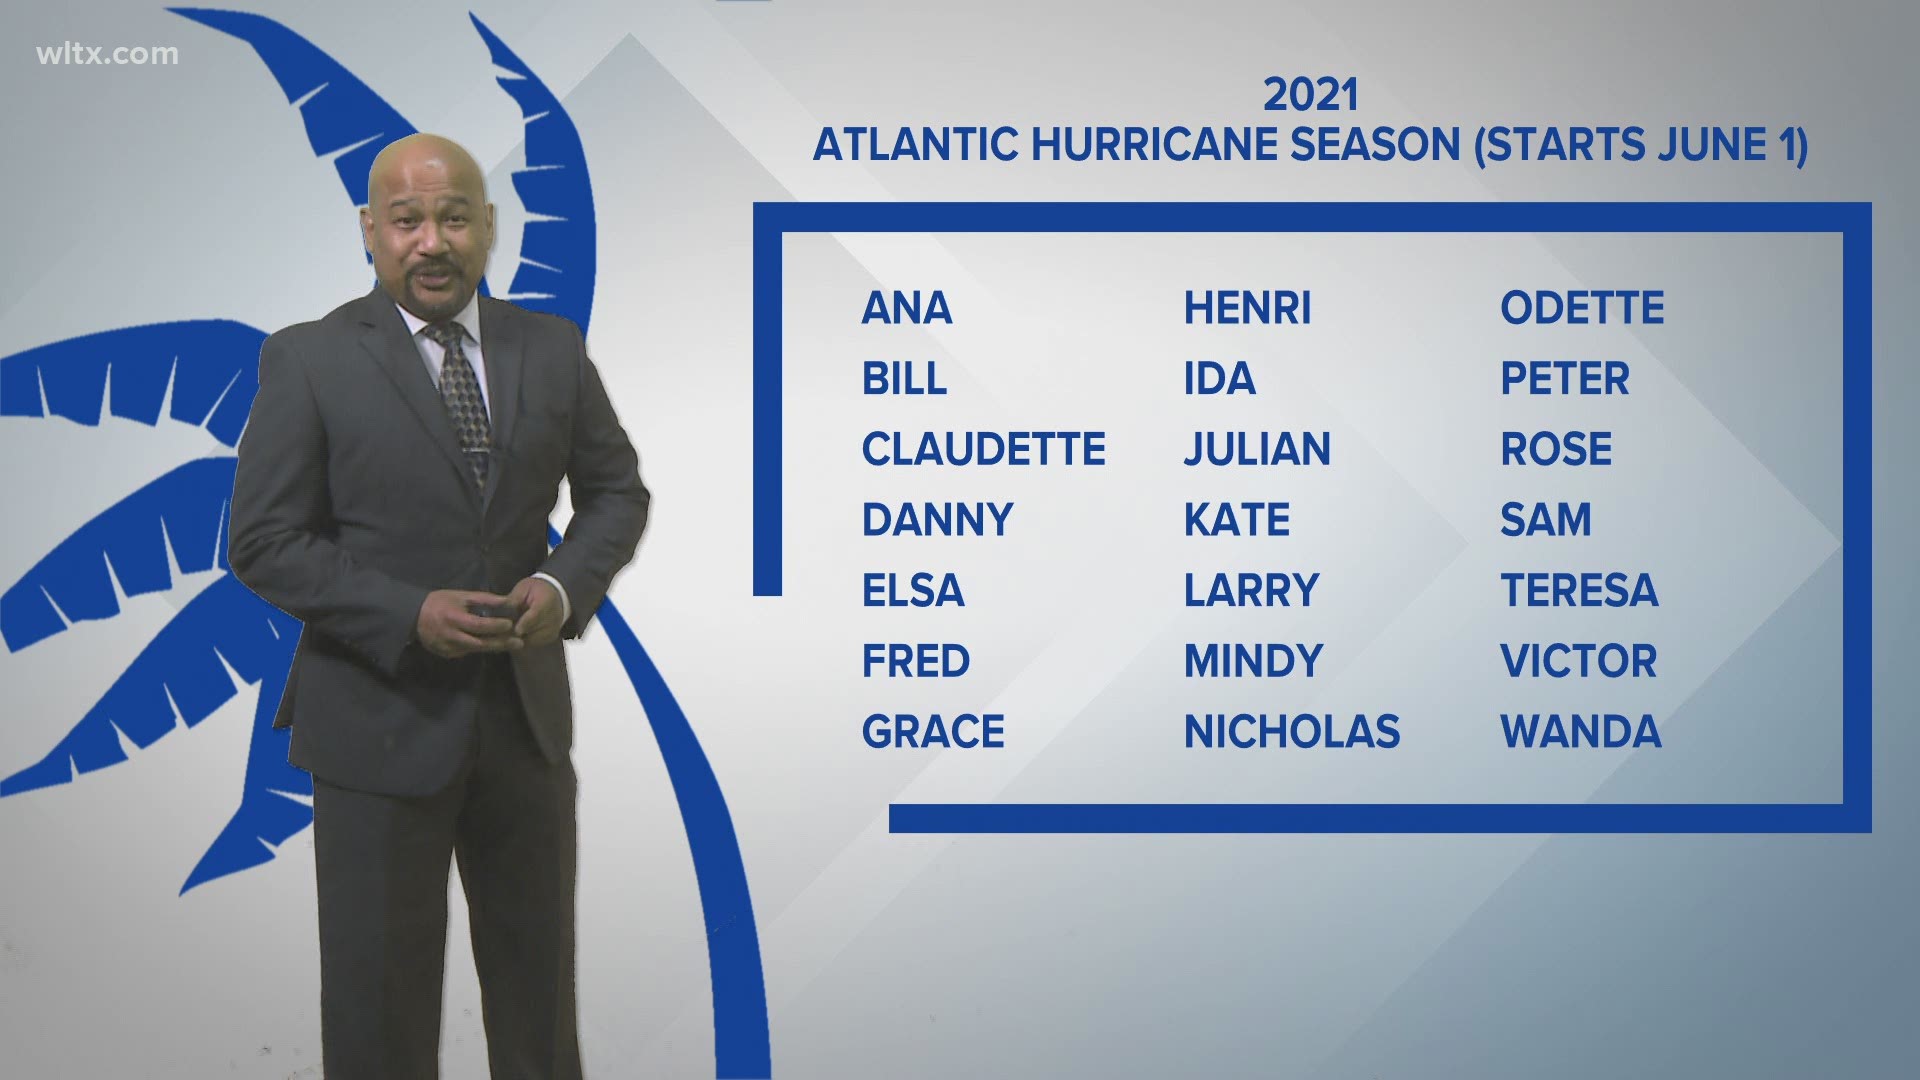 The 2021 Atlantic hurricane season does not officially begin until June 1st, but we're already tracking the first disturbance of what may be a busy season.